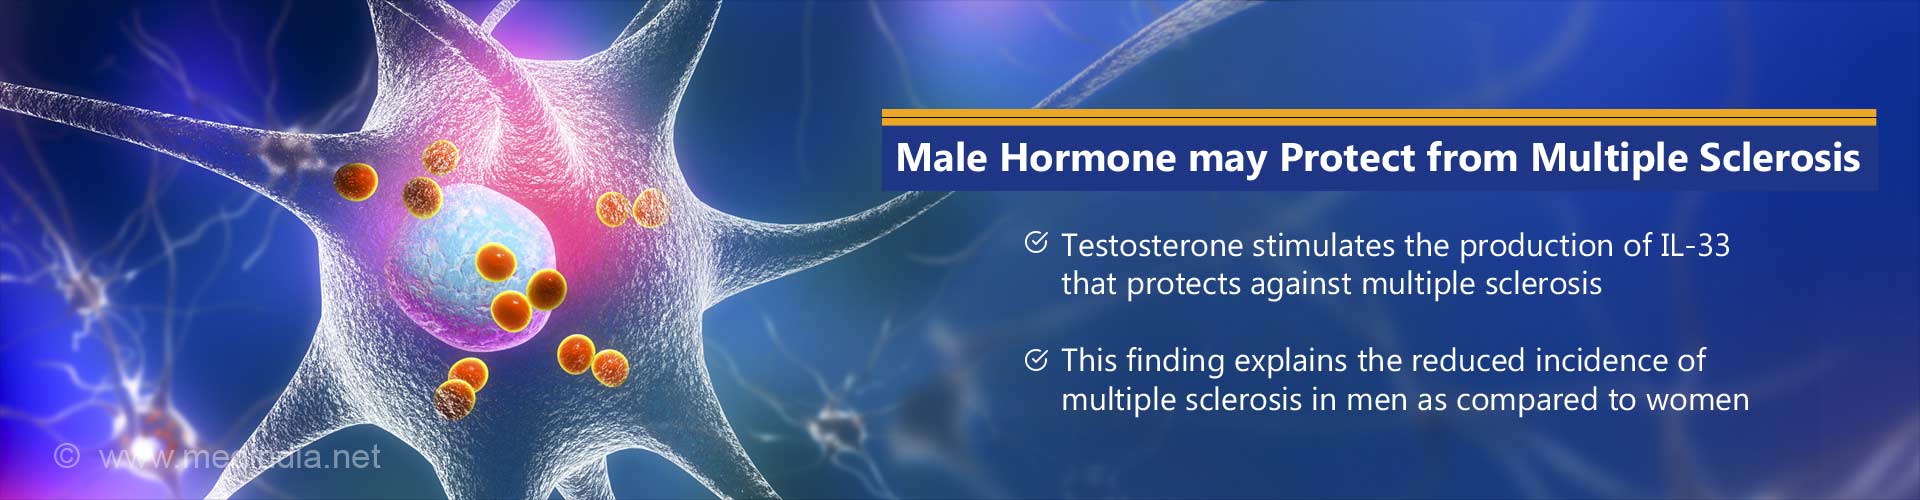 male hormone may protect from multiple sclerosis
- testosterone stimulates the production of IL-33 that protects against multiple sclerosis
- this finding explains the reduced incidence of multiple sclerosis in men as compared to women